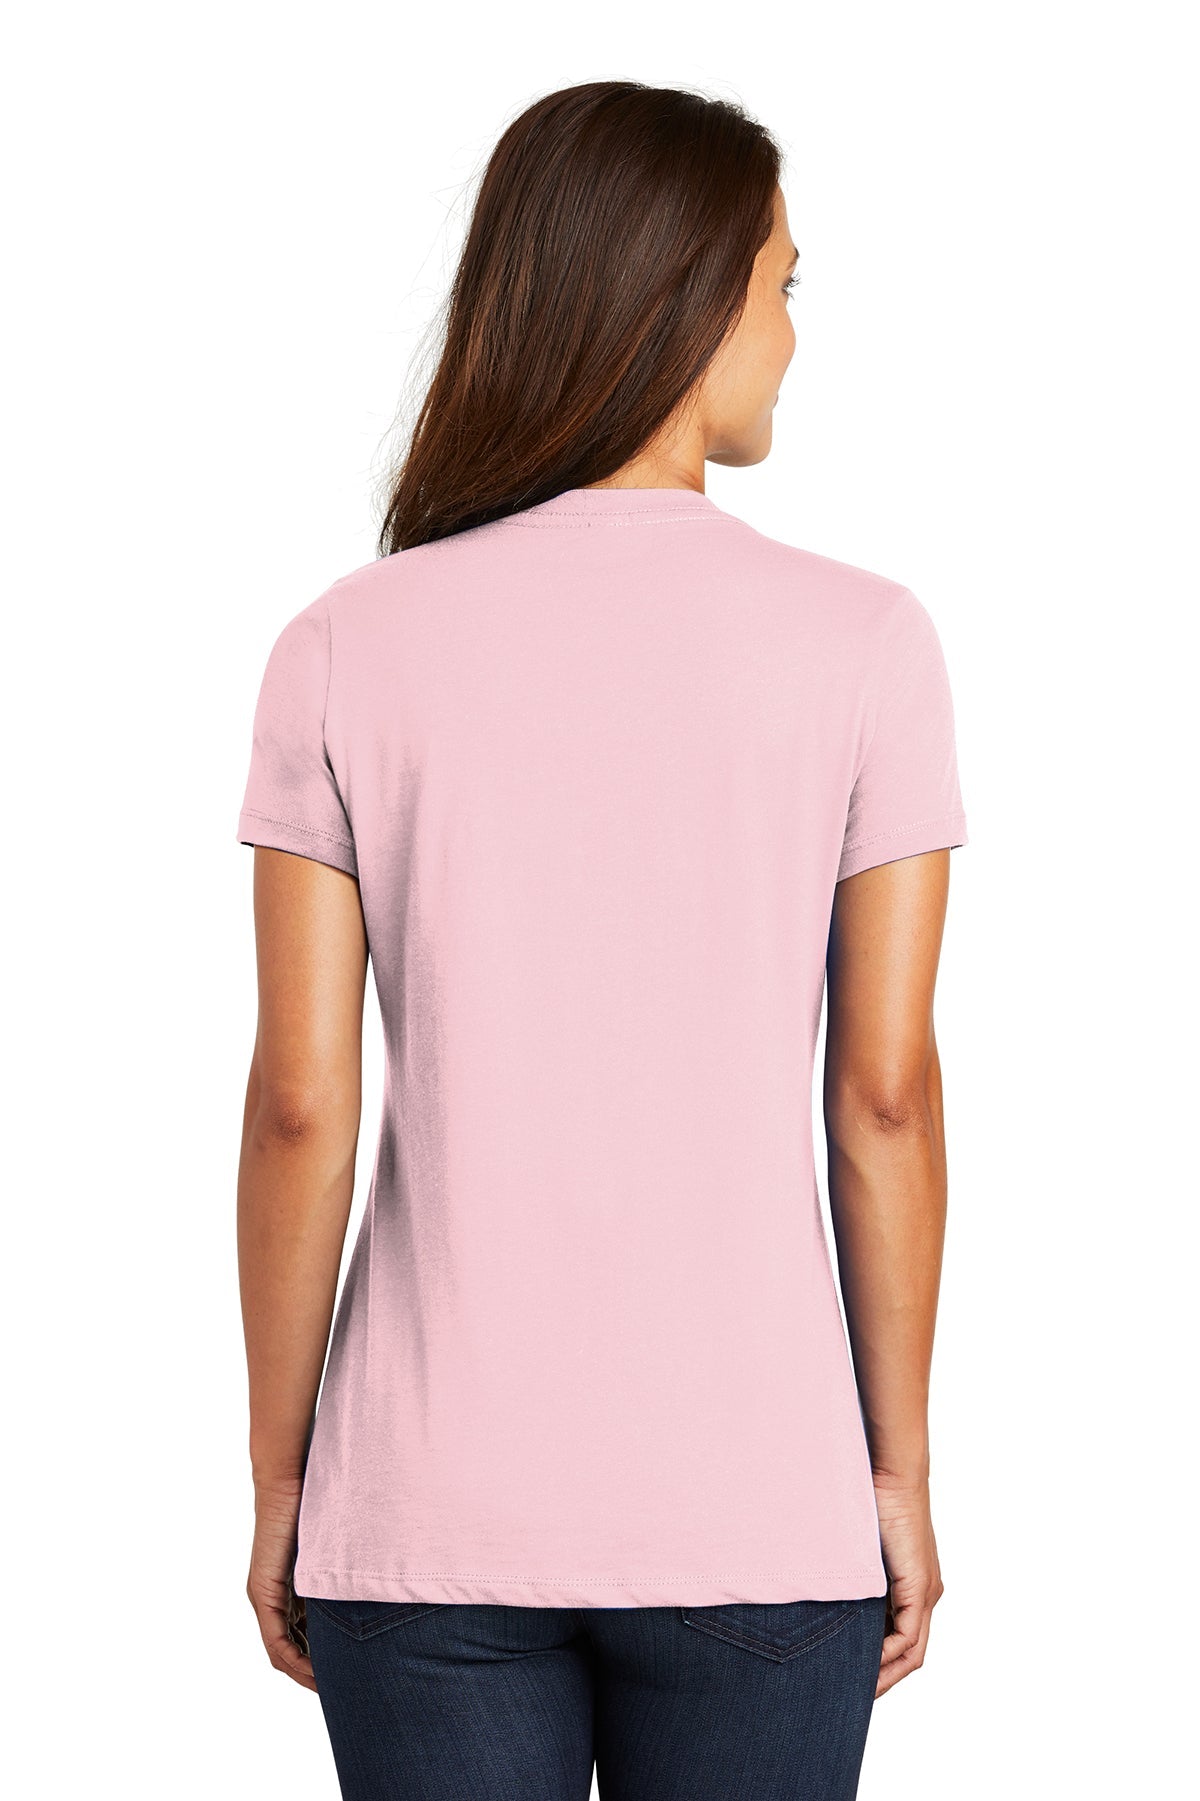 District Made - Ladies Perfect Weight V-Neck Tee